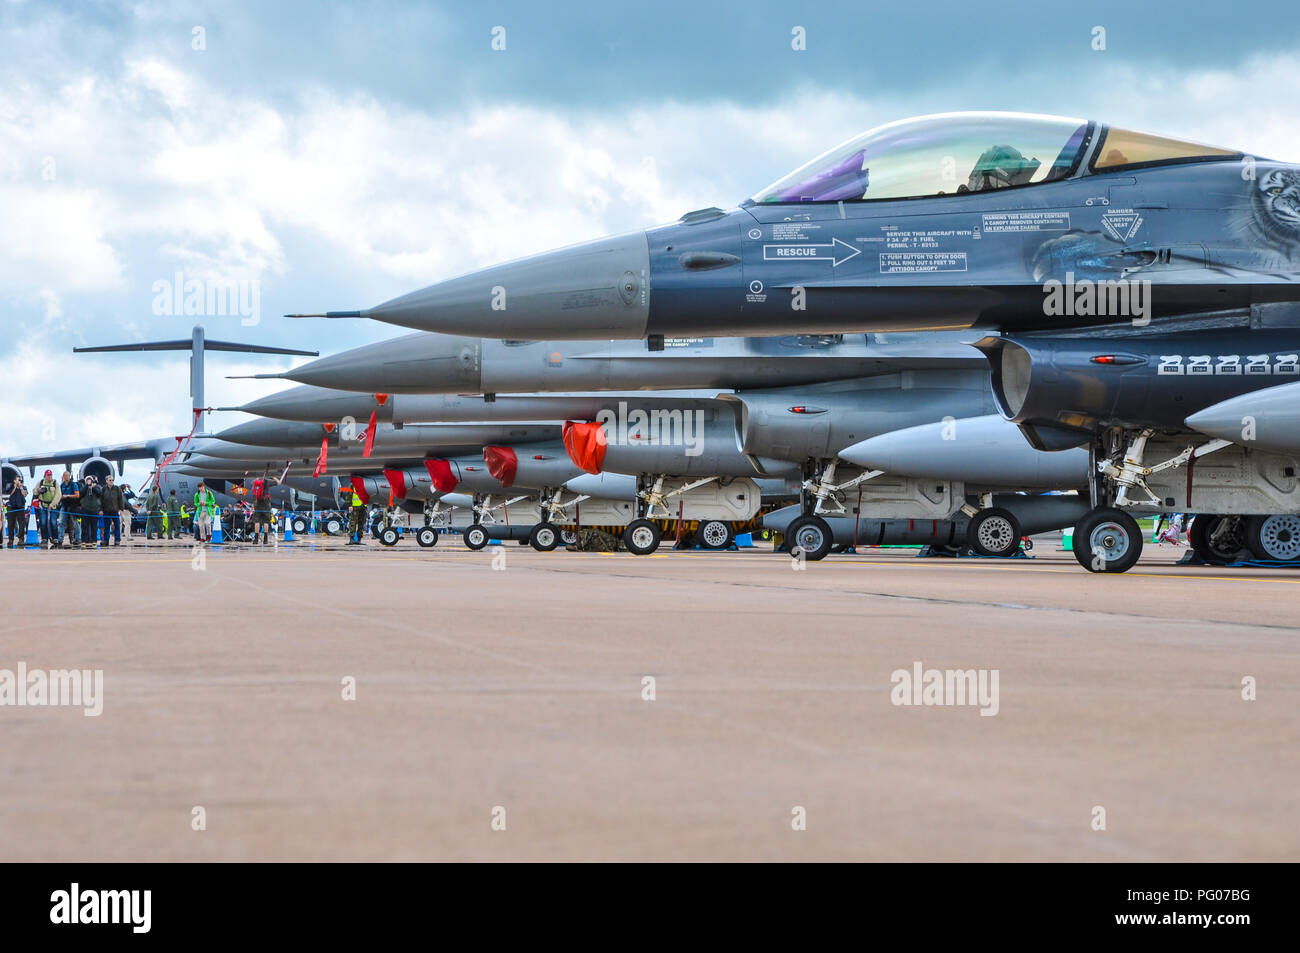 Line up of General Dynamics Lockheed Martin F-16 Fighting Falcon fighter jets at the Royal International Air Tattoo RIAT RAF Fairford, UK Stock Photo